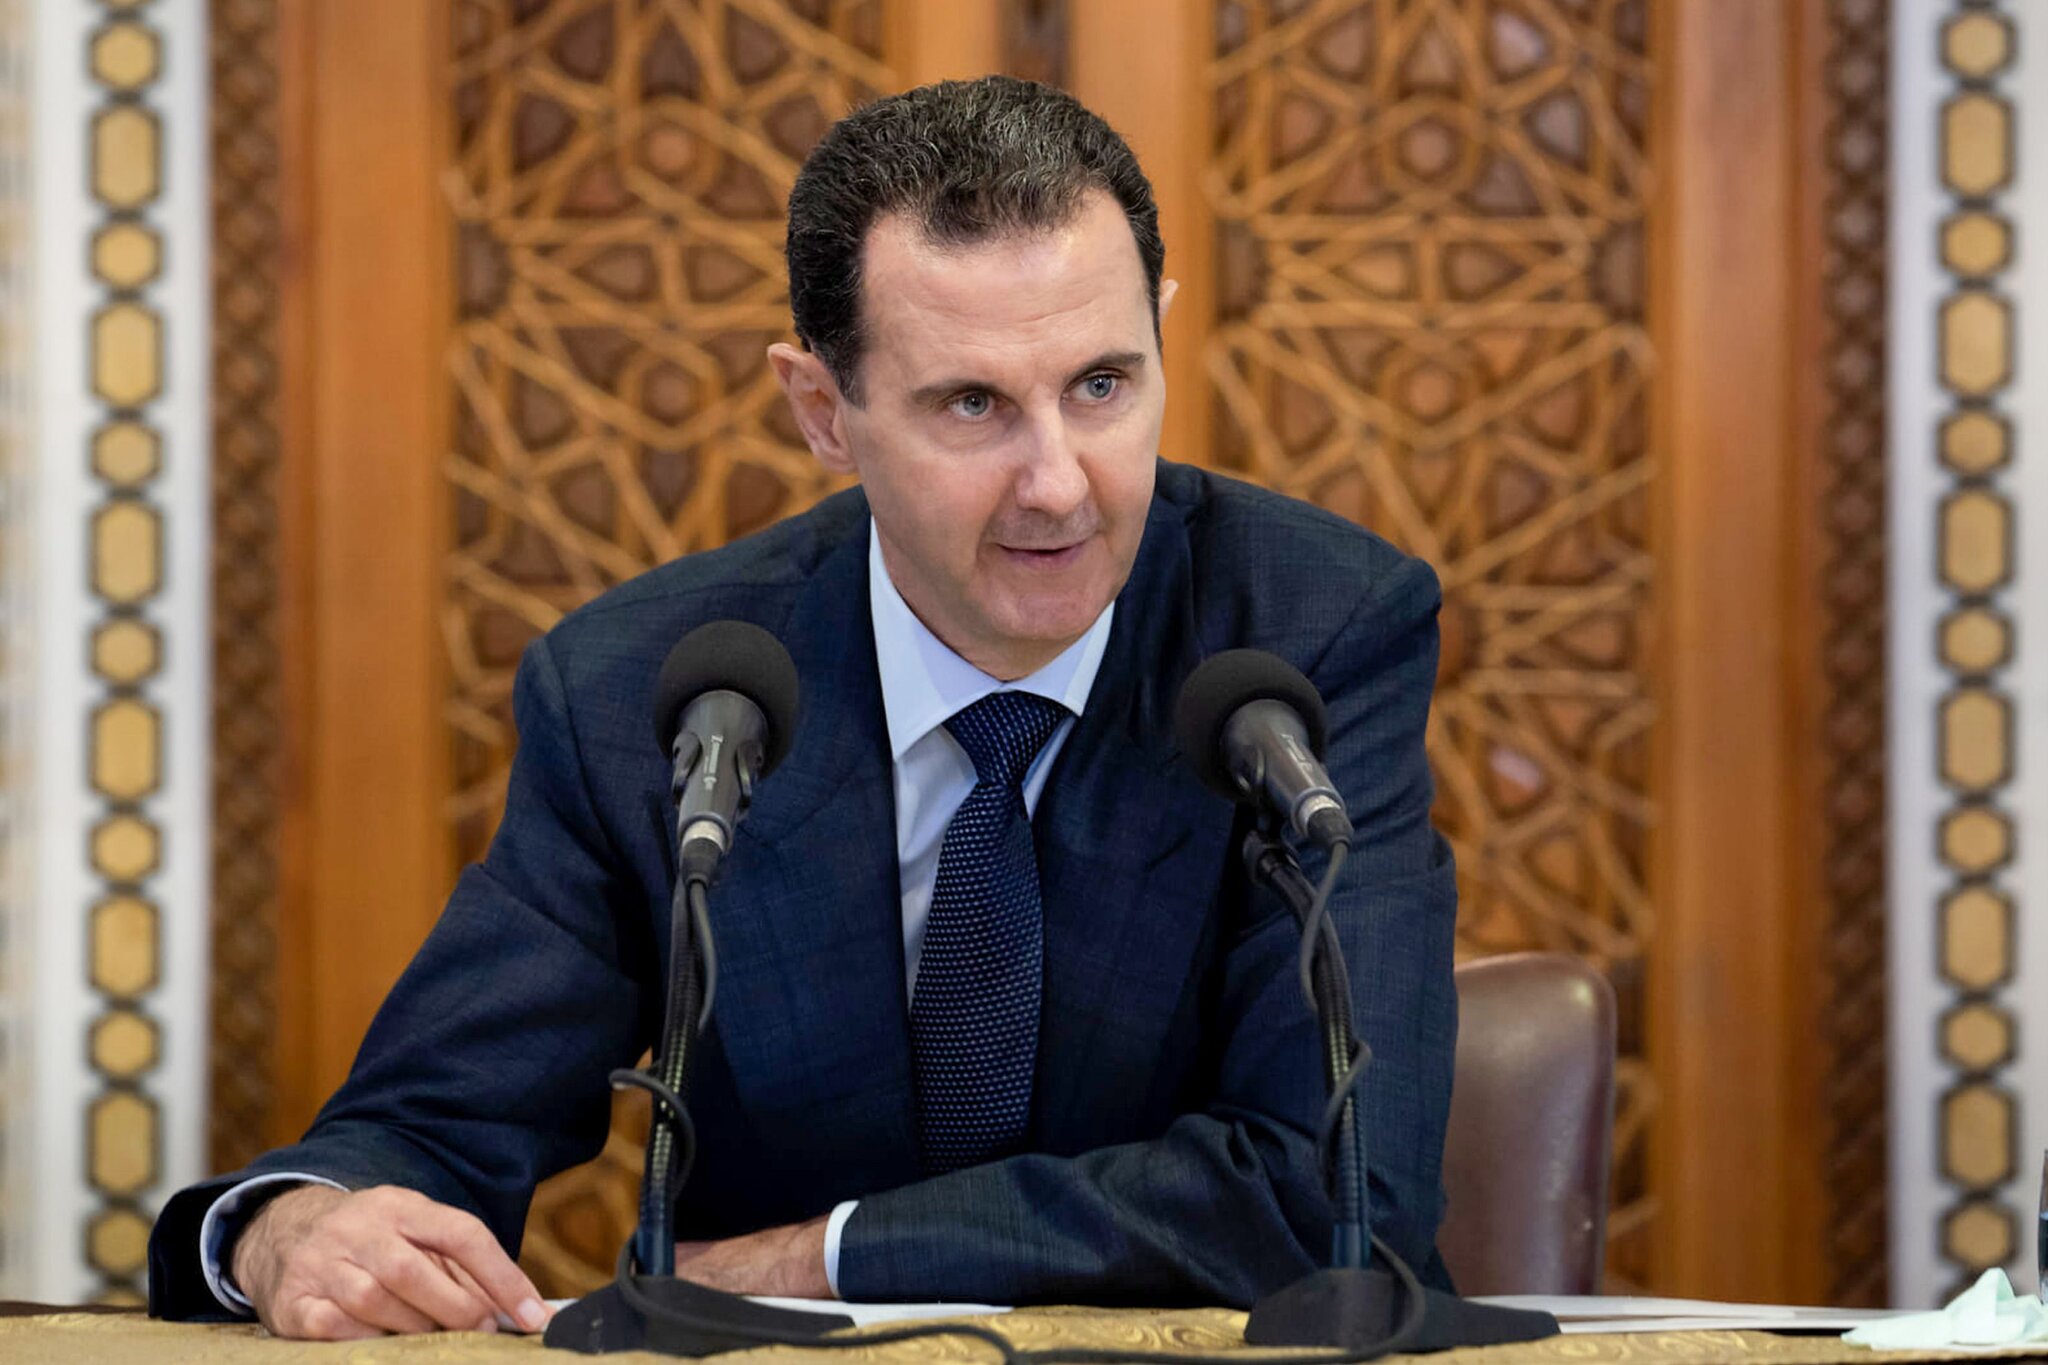 Bashar al-Assad: The Gaza War Revealed the True and Deceptive Face of the West and America